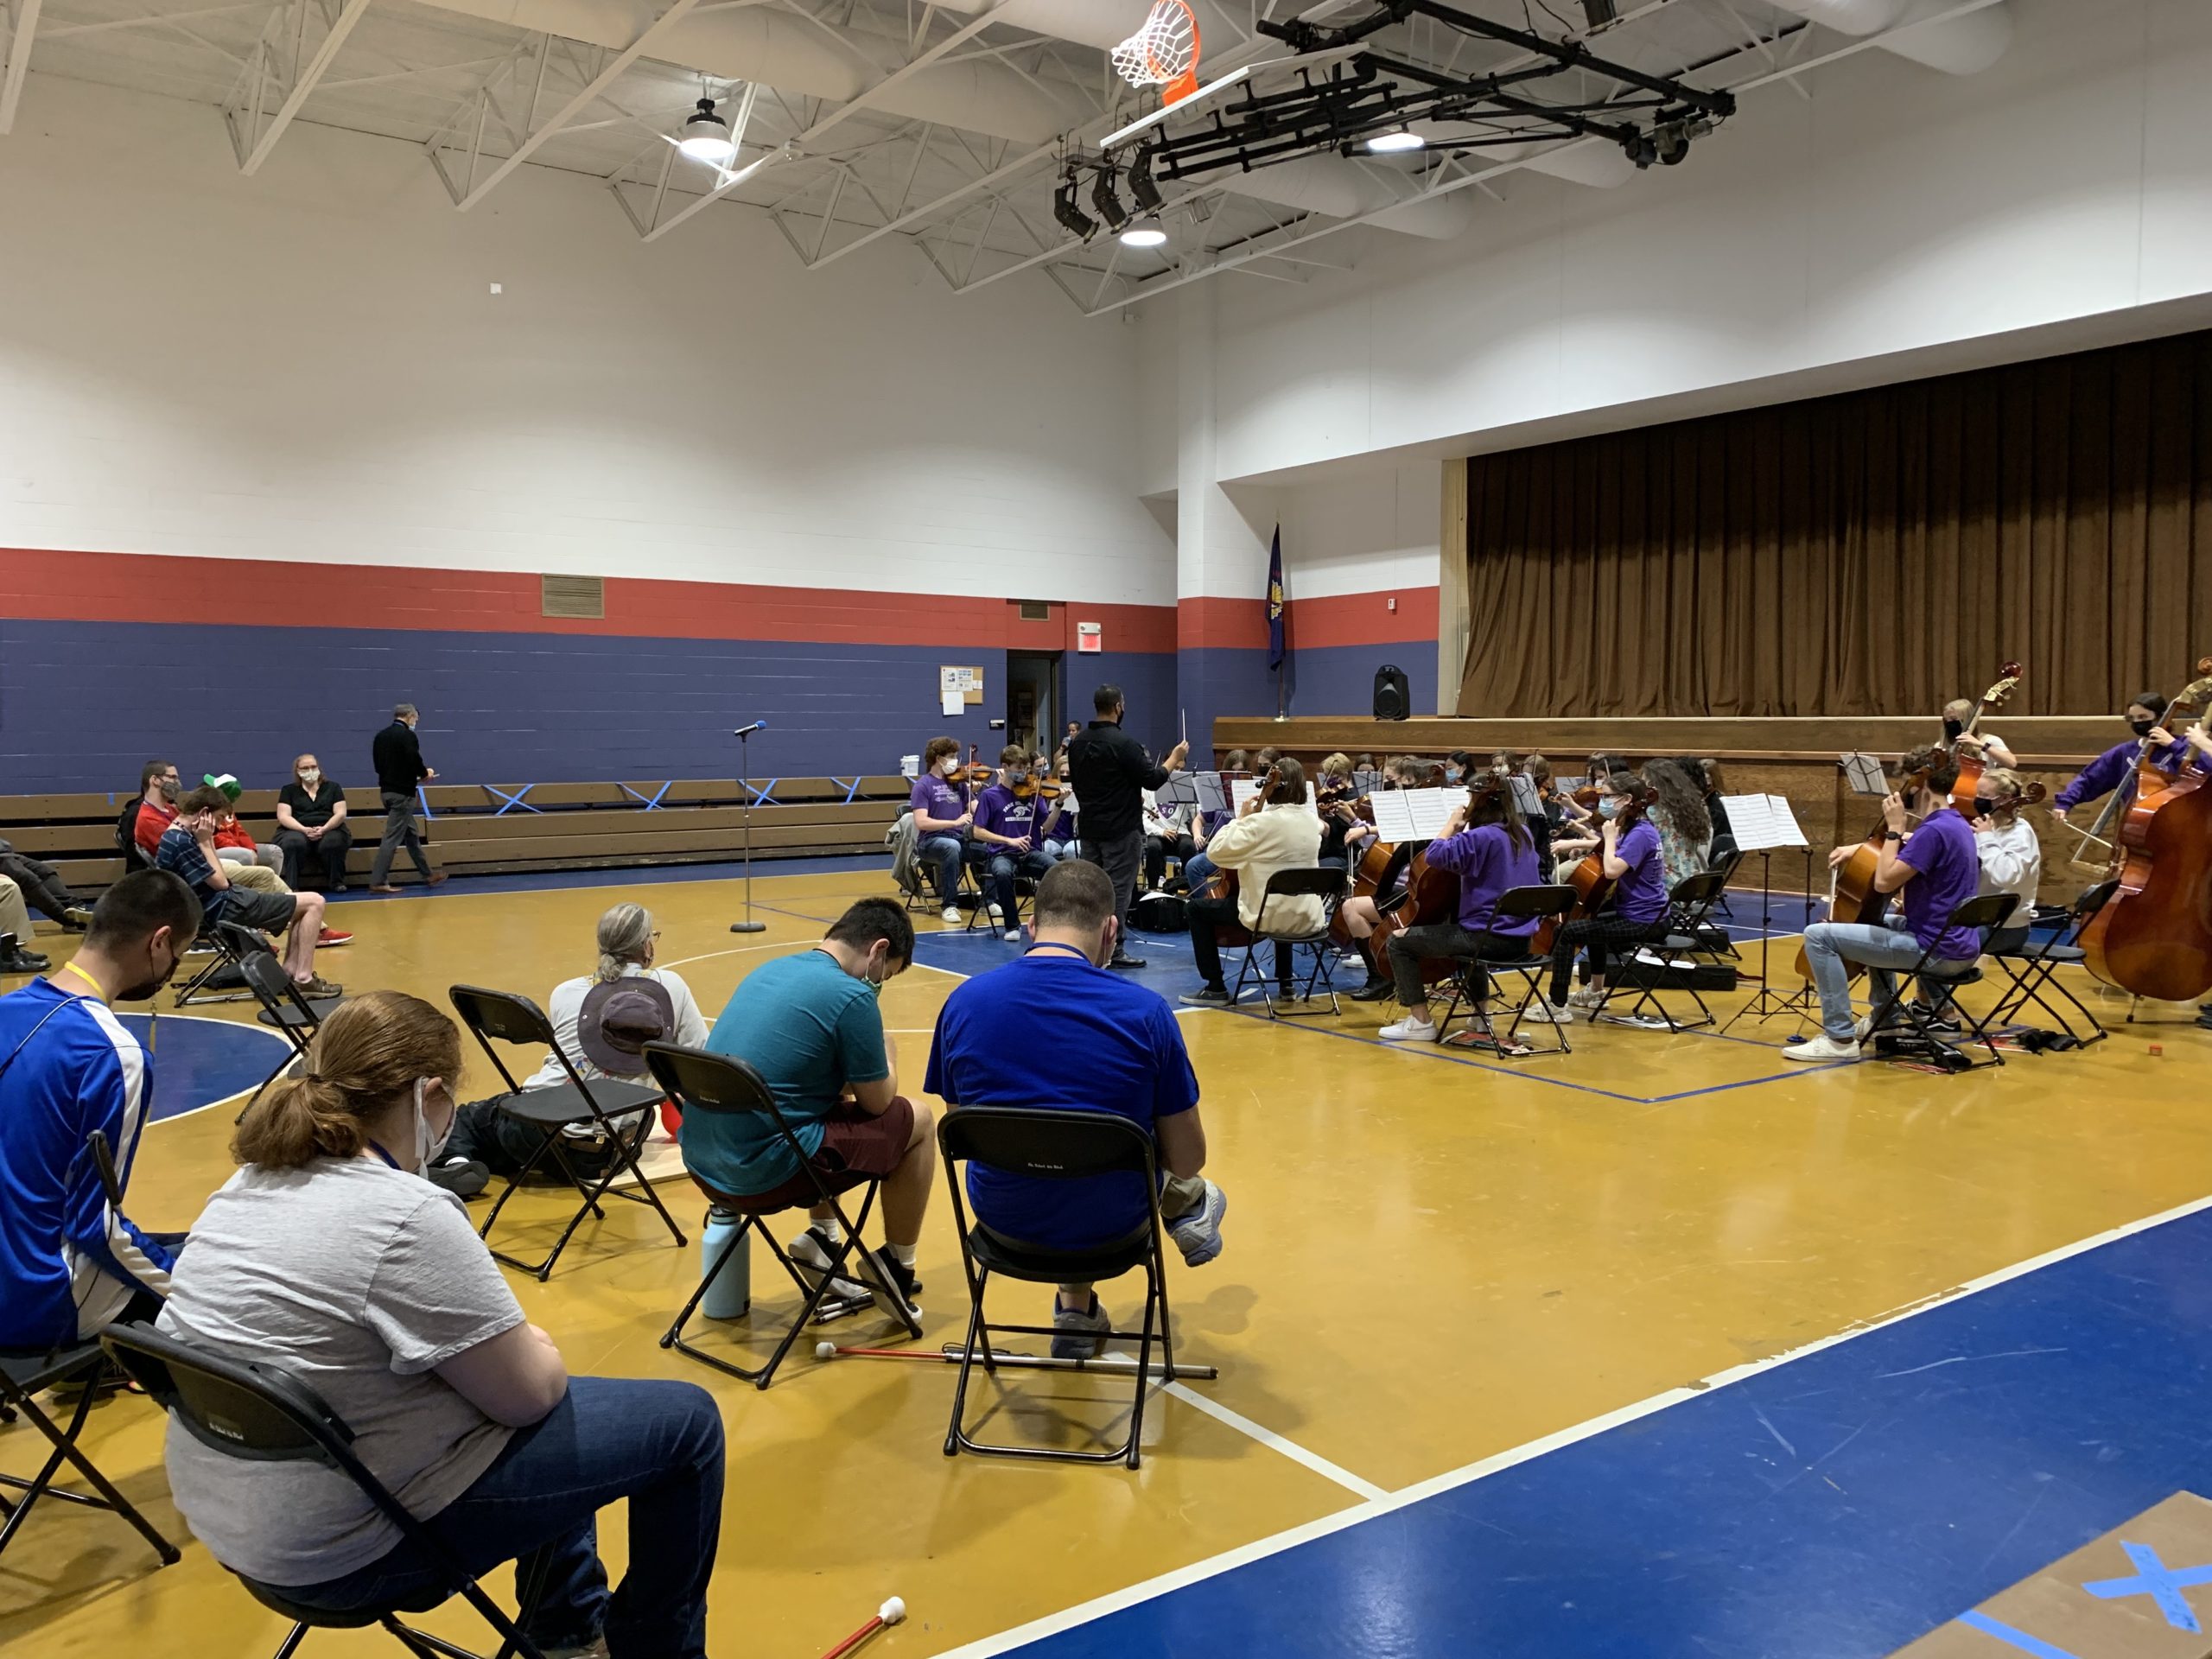 students and staff sit in chairs, on the gym floor, and on the bleachers and listen the symphonic orchestra.